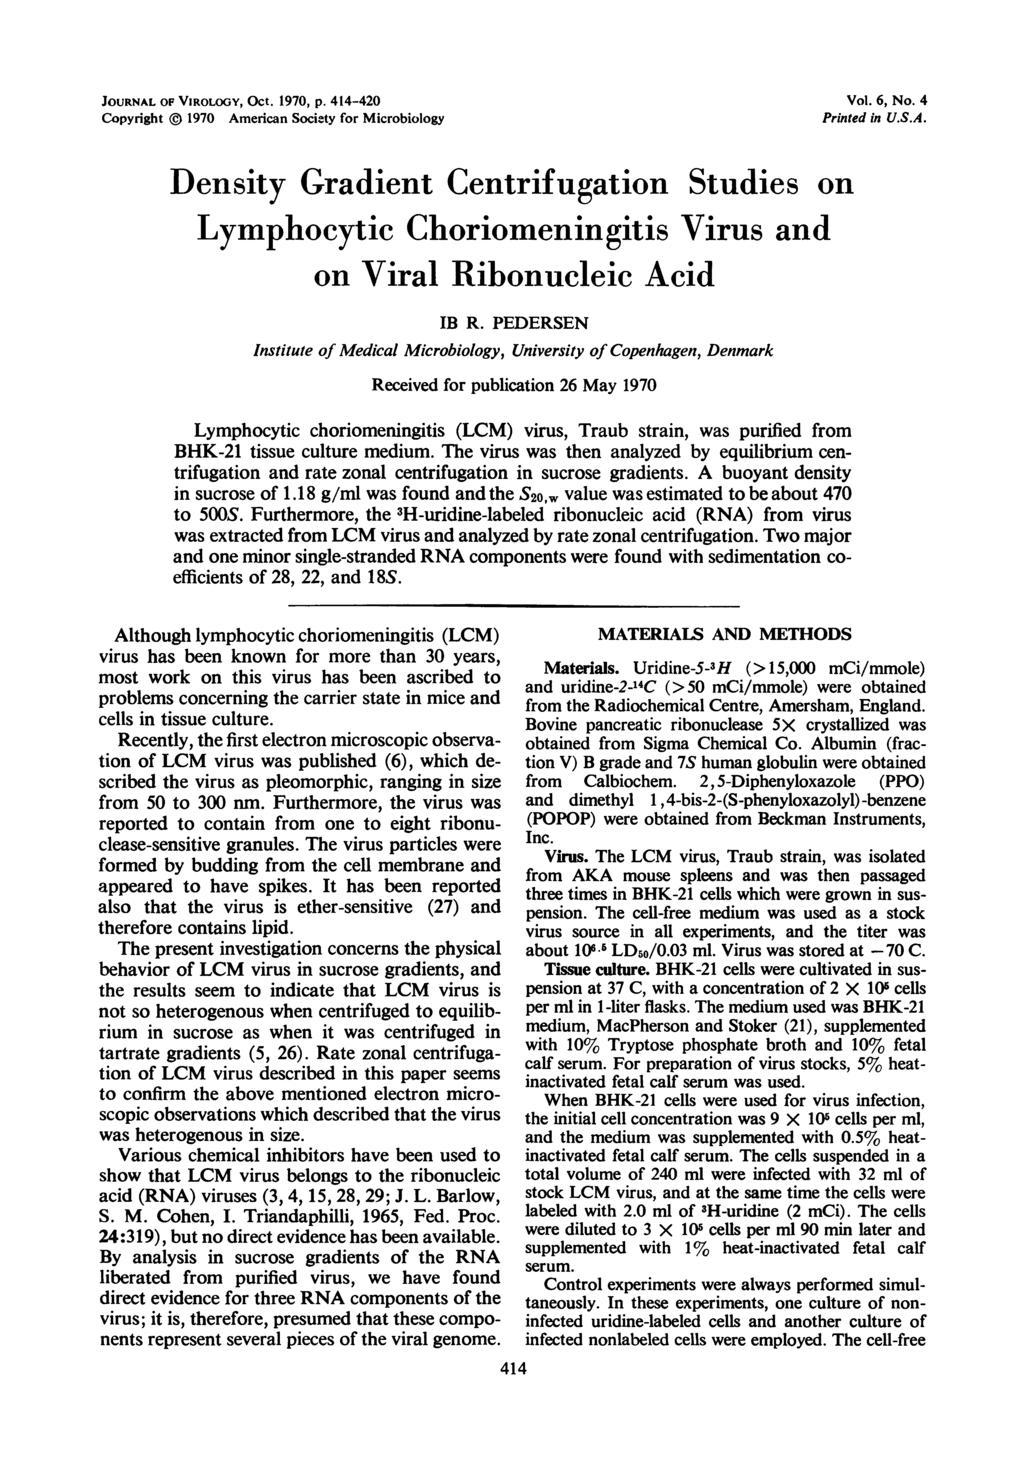 JOURNAL OF VIROLOGY, OCt. 197, p. 414-42 Copyright 197 American Society for Microbiology Vol. 6, No. 4 Printed in U.S.A. Density Gradient Centrifugation Studies on Lymphocytic Choriomeningitis Virus and on Viral Ribonucleic Acid IB R.